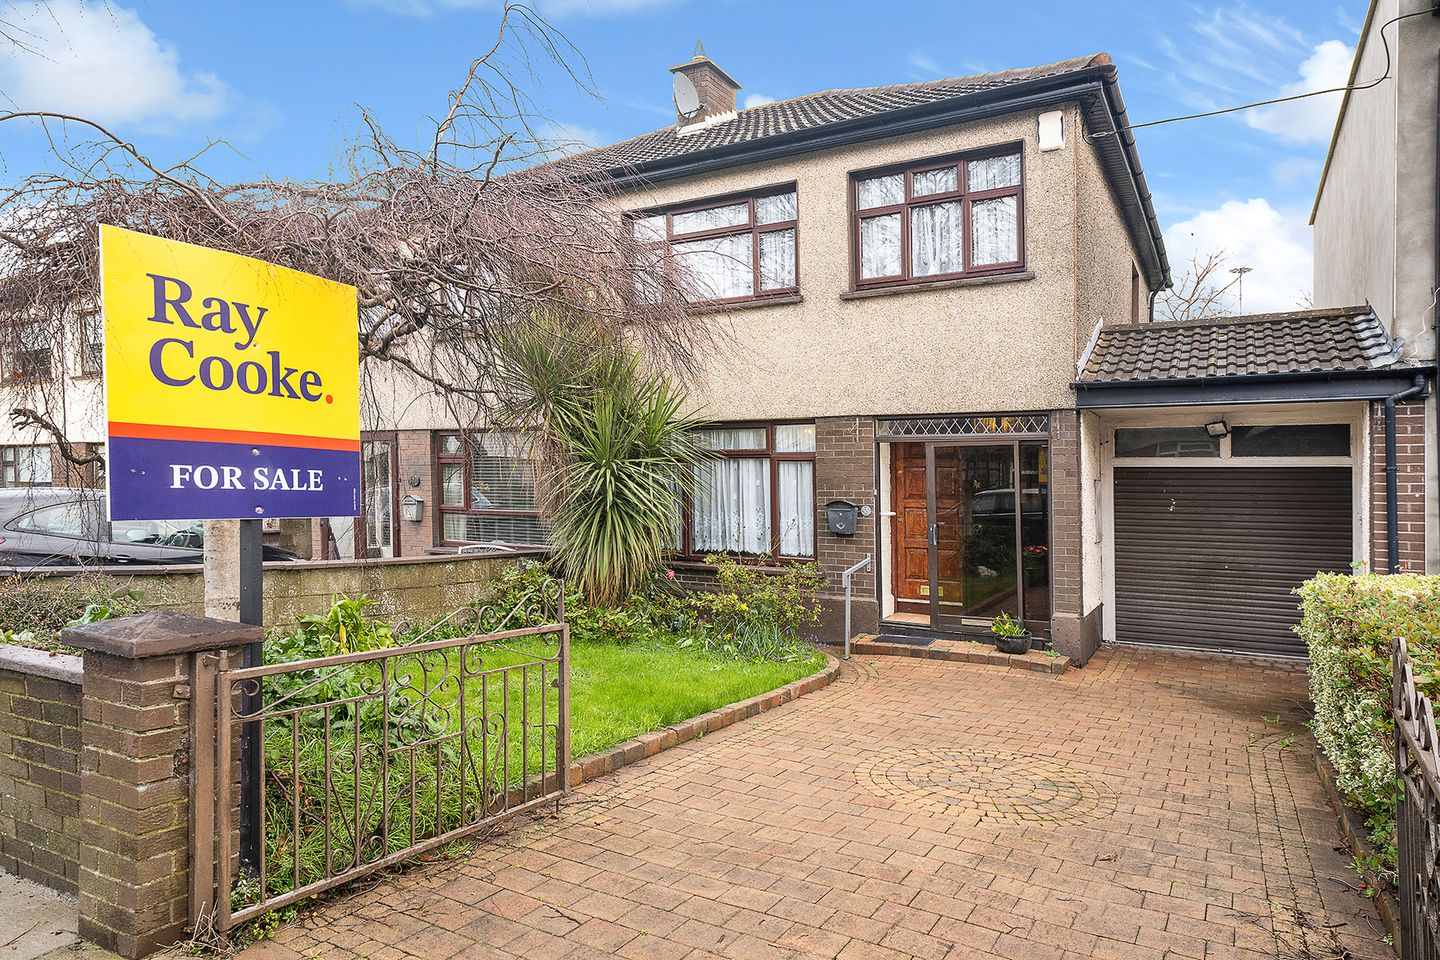 55 Forest Drive, Kingswood, D24 H2FW, Tallaght, Dublin 24